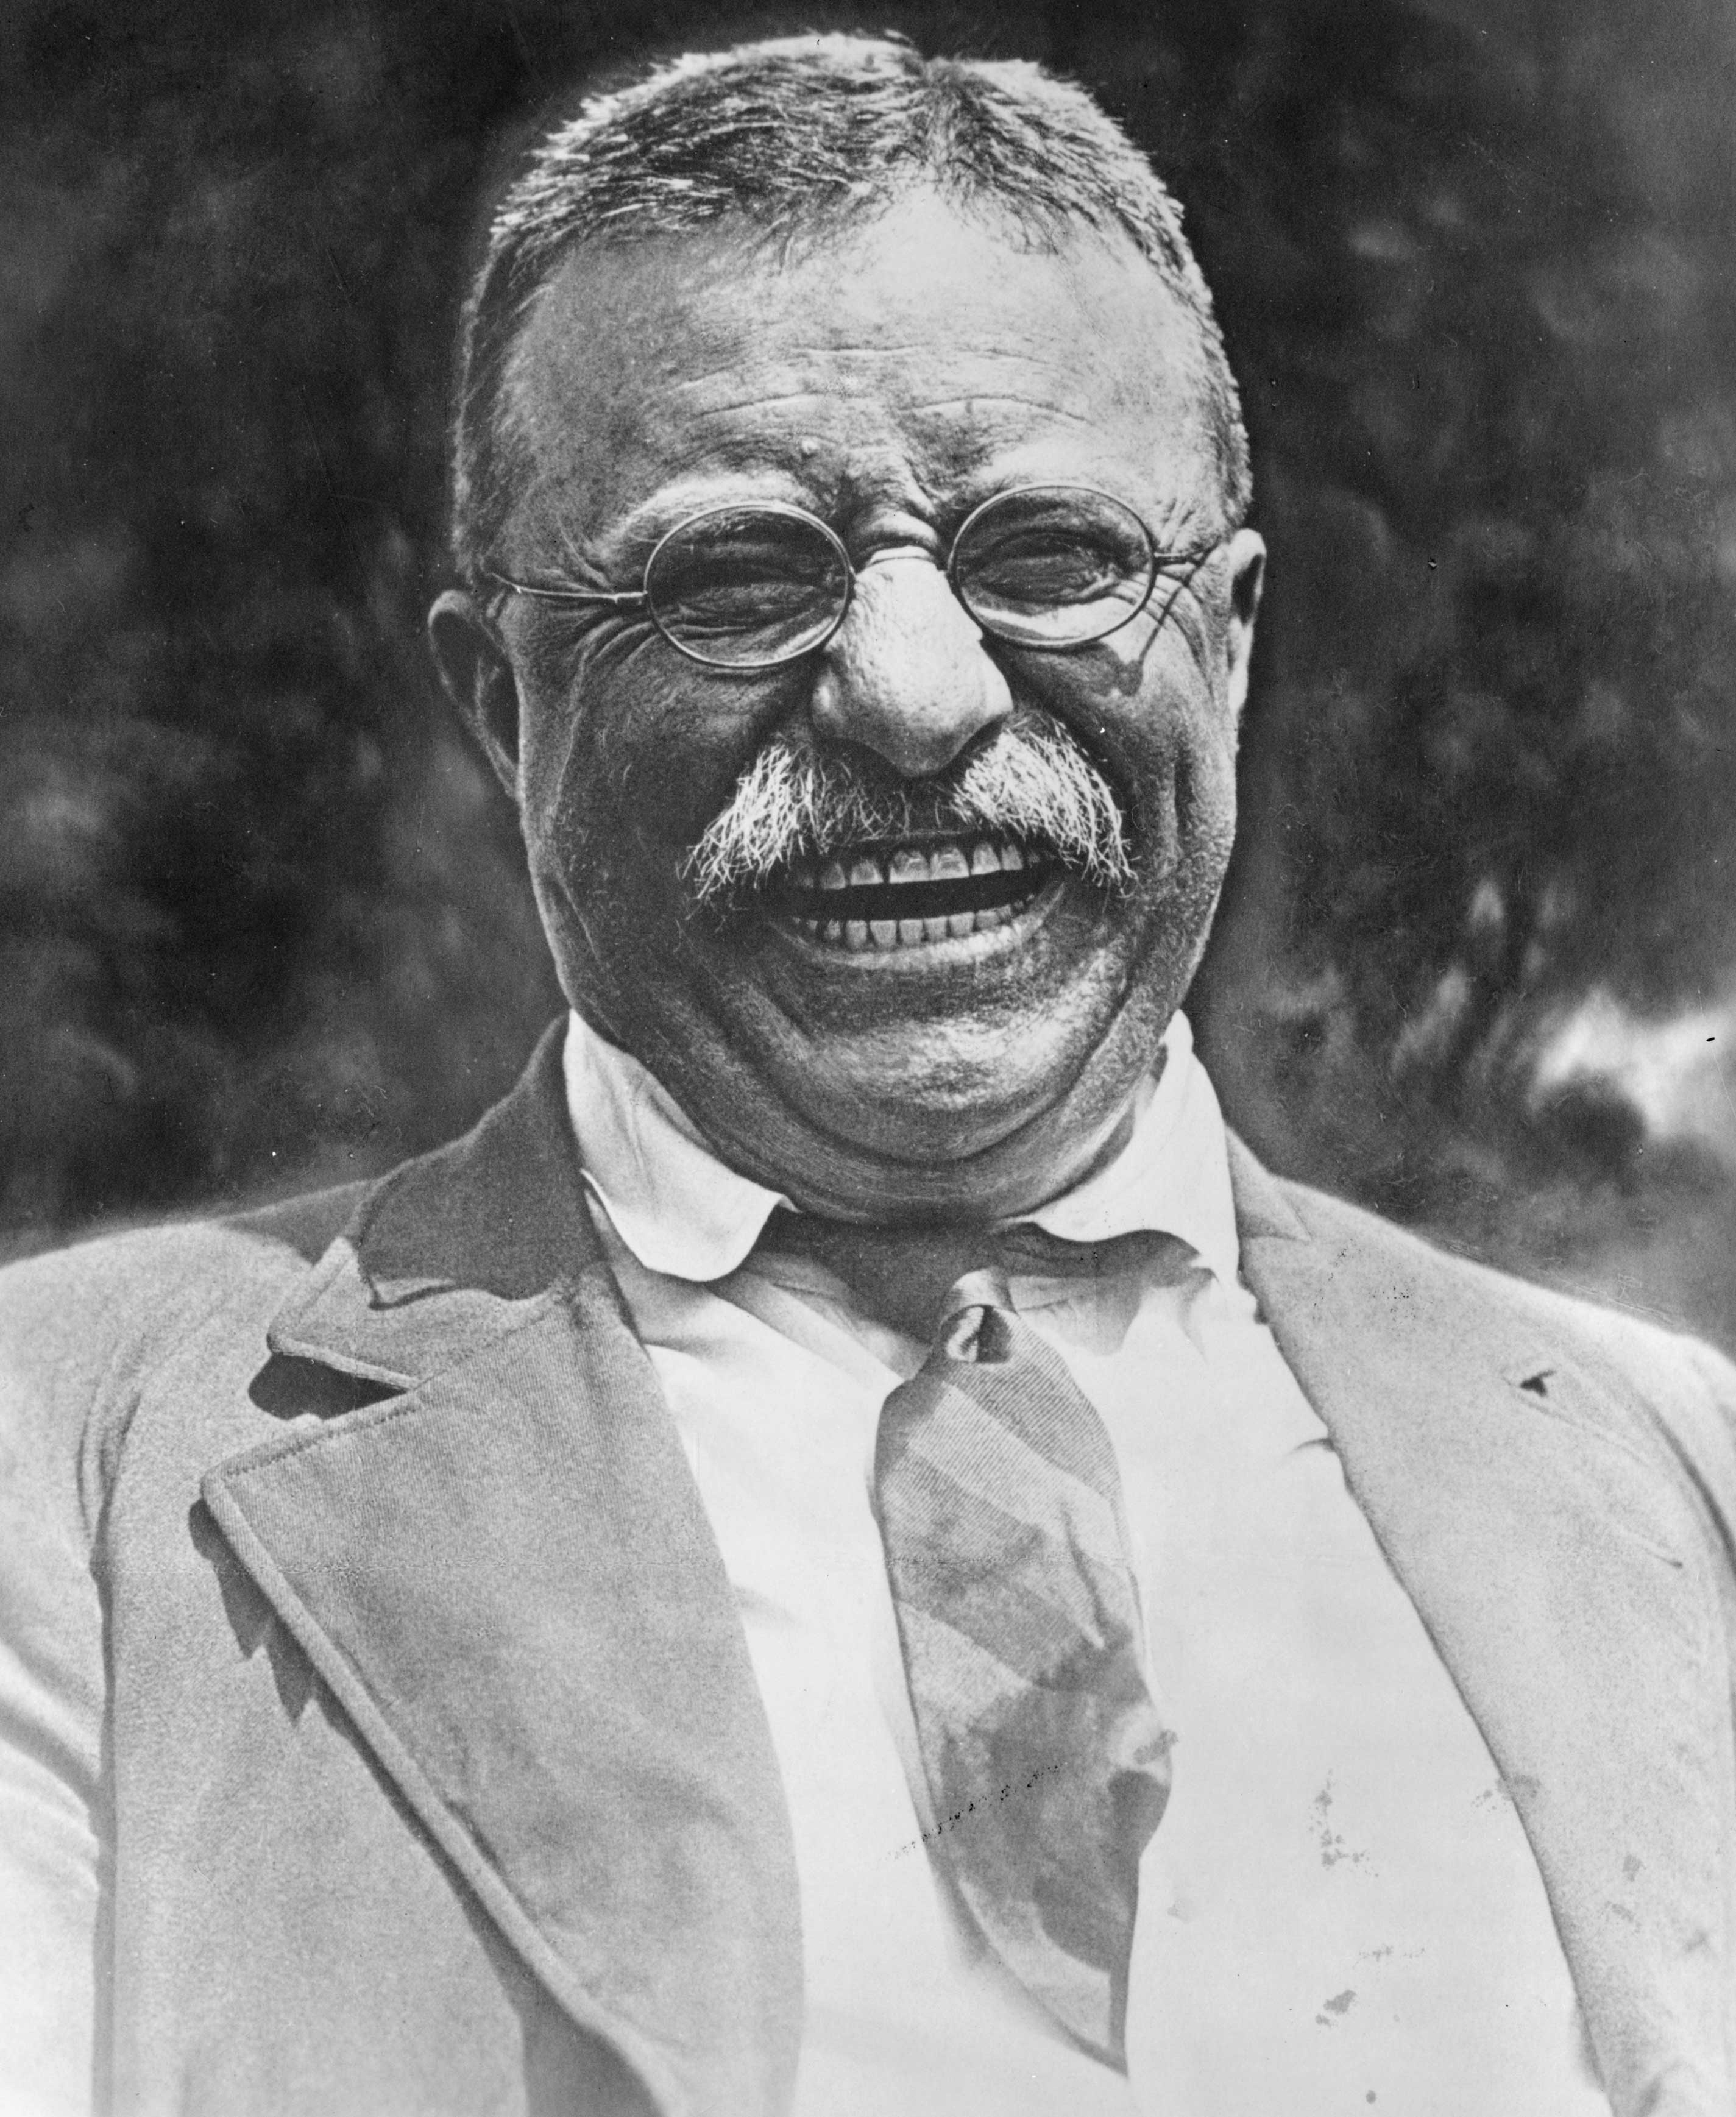 teddy roosevelt,Stephen Rodgers, Stephen Rodgers Counseling of Denver, Stephen Rodgers Counseling, counselors in Denver for men, therapists for men in Denver, looking for a counselor, how to find a therapist, men’s issues, depression in men, anxiety in men, happiness, depression, anger, anger problems, how to deal with my anger problems, I feel hopeless, I feel like giving up, my family hates me, I made a big mistake, how to recover from a divorce, how to deal with an angry ex-wife, I can’t perform anymore, Sondermind, National Association of Social Workers, family therapy, art therapy for kids in Denver, child psychologist, child therapist, help with my relationship, how can I fix my relationship, I feel like there is no point, panic attacks, how to deal with anxiety, fear. trauma, PTSD, dealing with PTSD, help for veterans with PTSD, therapist in Denver for PTSD, behavioral issues with my child, my child is acting out, sexual abuse, sexual trauma, sexual assault, dealing with rape, learning disabilities, help with learning disabilities, divorce, separation, dealing with divorce, dealing with separation, dealing with grief and loss, dealing with grief, dealing with loss, the steps of grief, widowhood, widow, death, death of a child, family discord, mental health, mental illness, wellness, therapy, Denver therapy practices, impotence, dealing with impotence, Viagra, losing my kids in custody battle, losing my hair, balding, money problems, losing my job, scared I might lose my family, scared I might lose my job, what is therapy like, I think my child needs therapy, 50 Steele Street, Suite #950, Denver, Colorado, services, faq, men, father-son, olympics